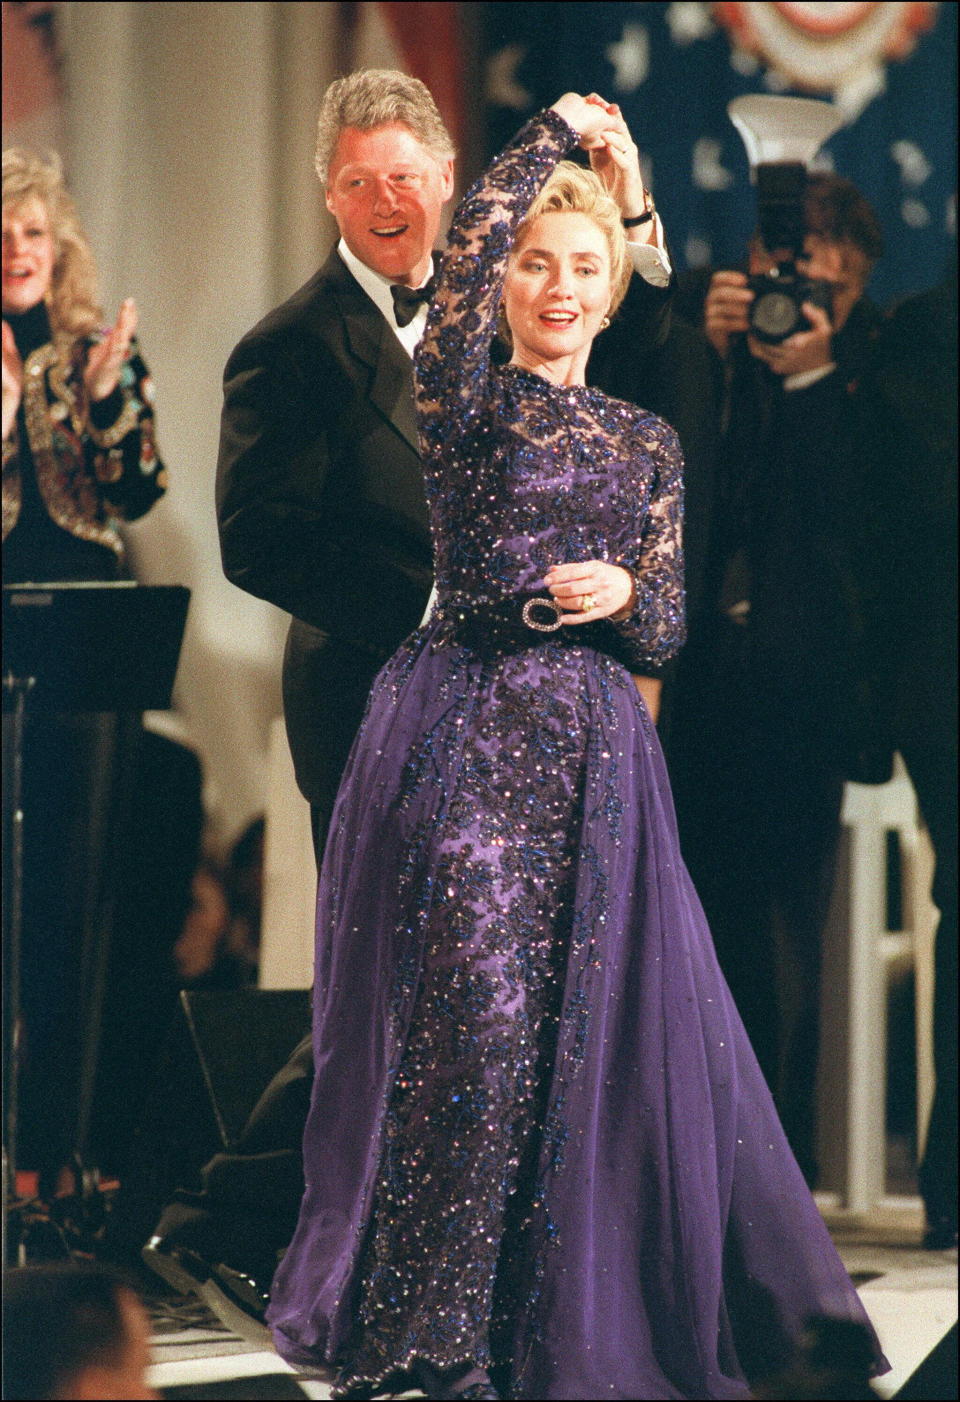 The couple dancing at the 1993 inaugural ball hosted by their then-home state of Arkansas.